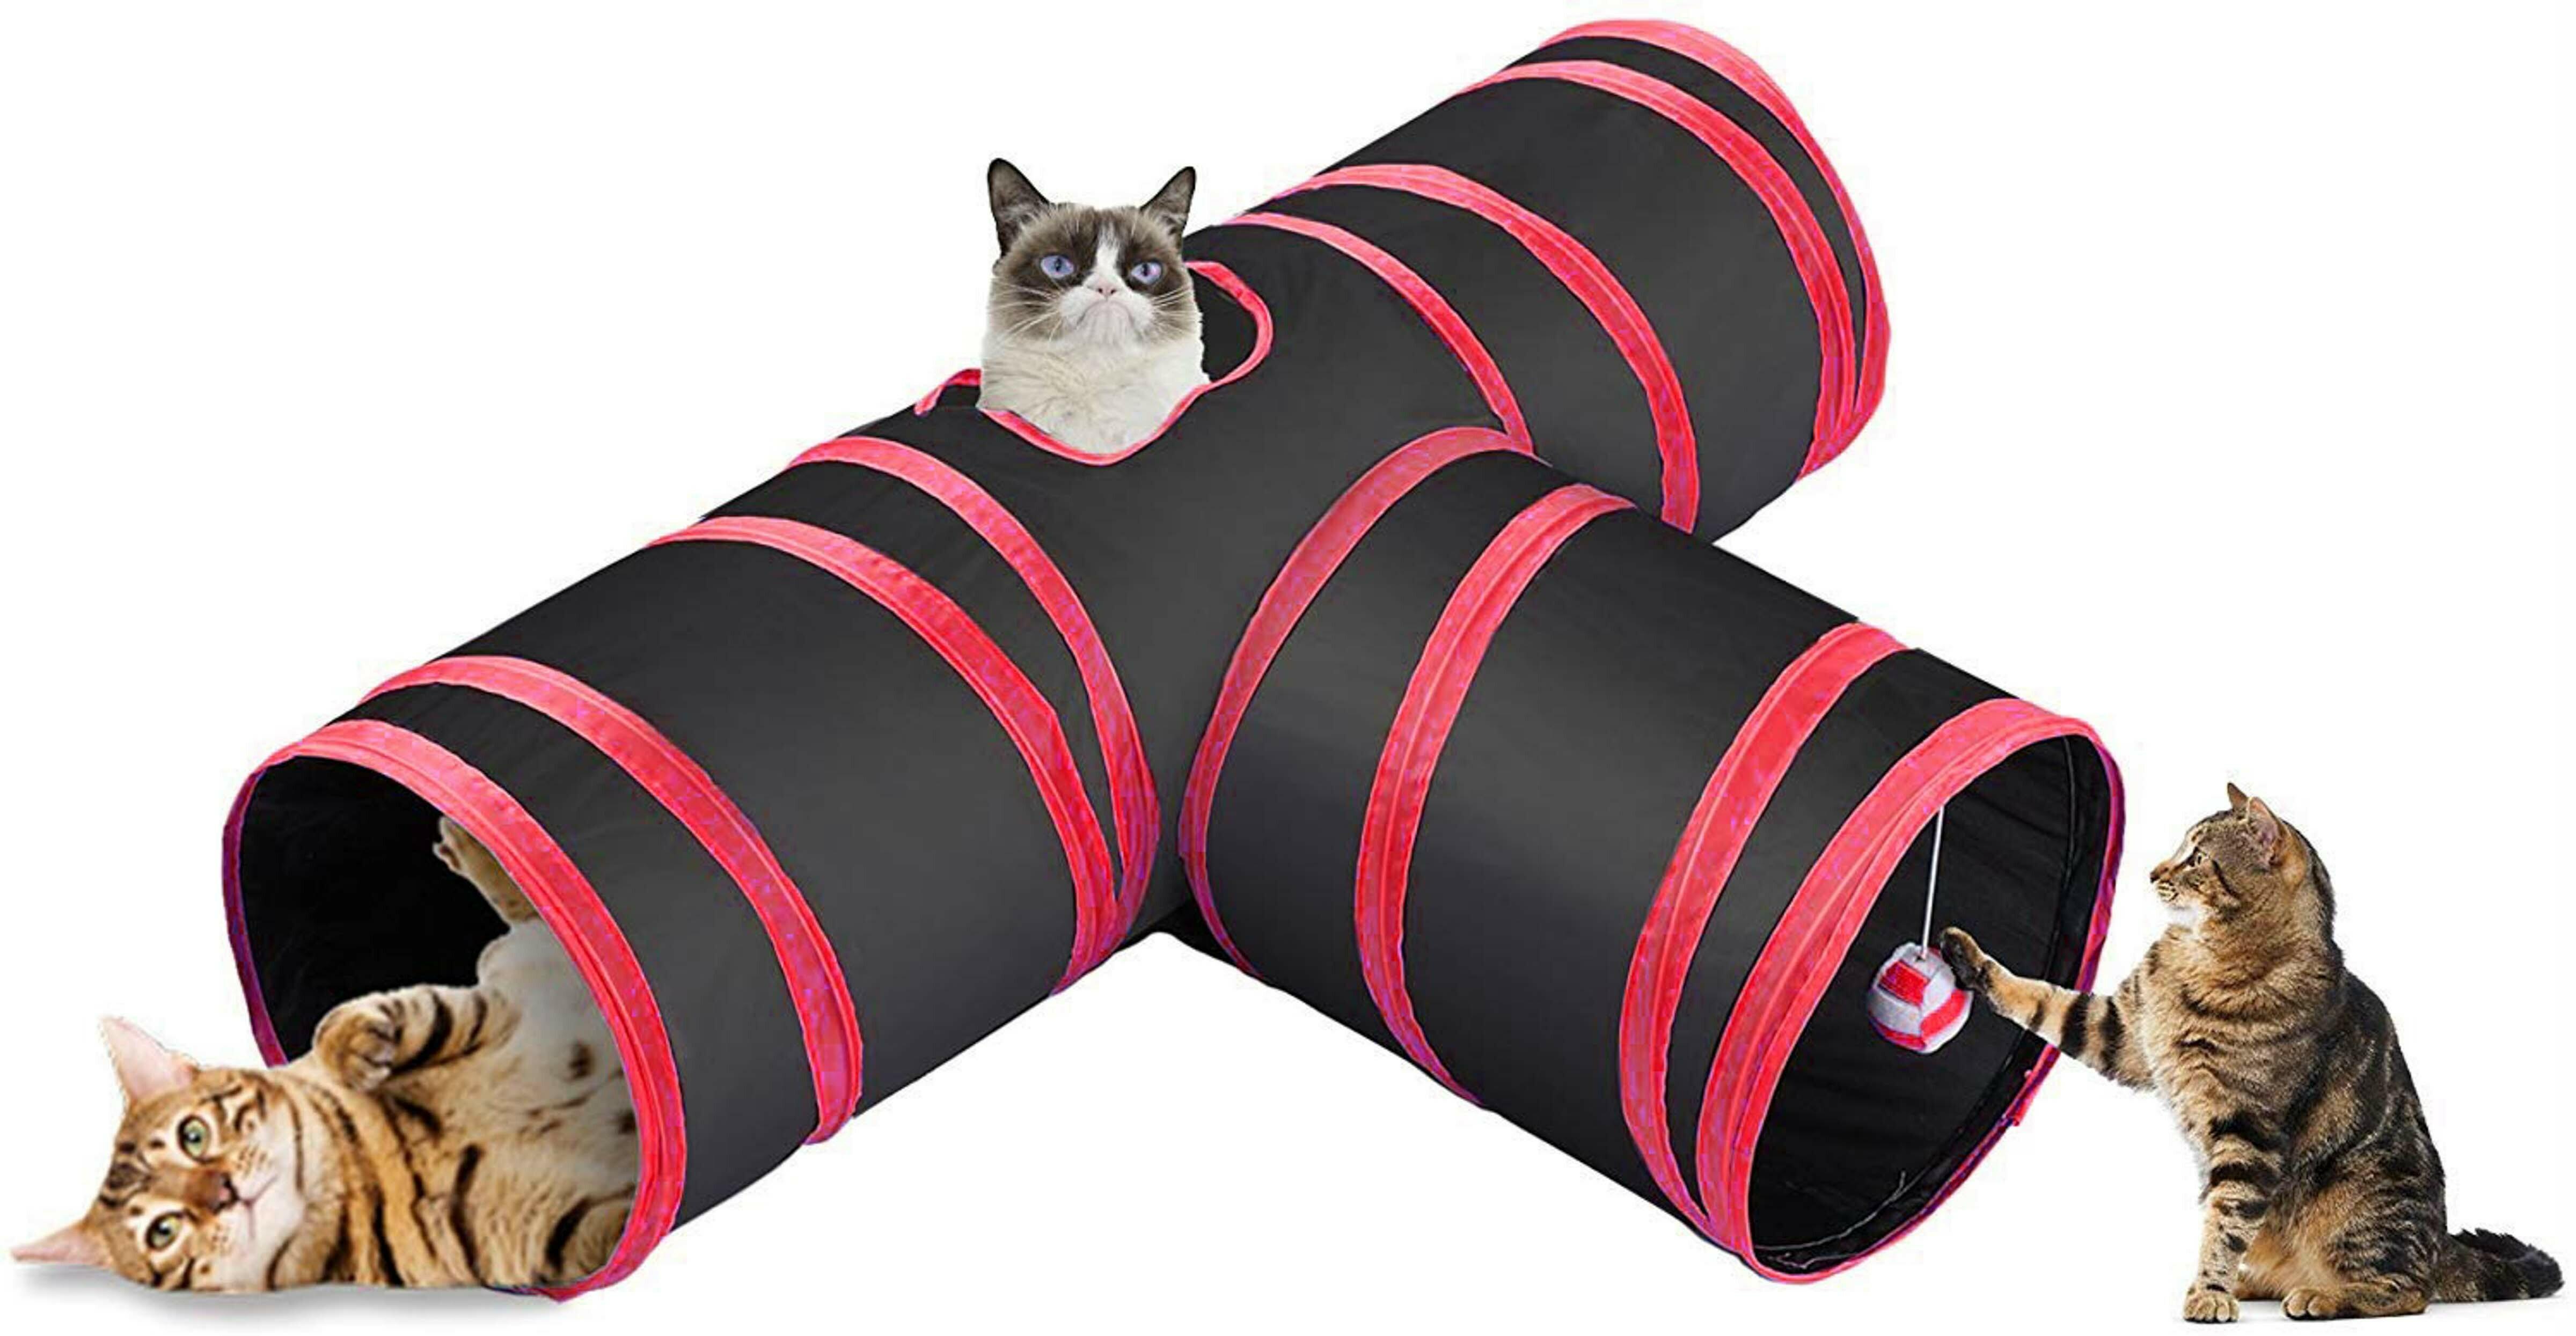 Collapsible 3 Way Play Toy Pet Cat Tunnel Tube Fun for Rabbits Kittens and Dogs 